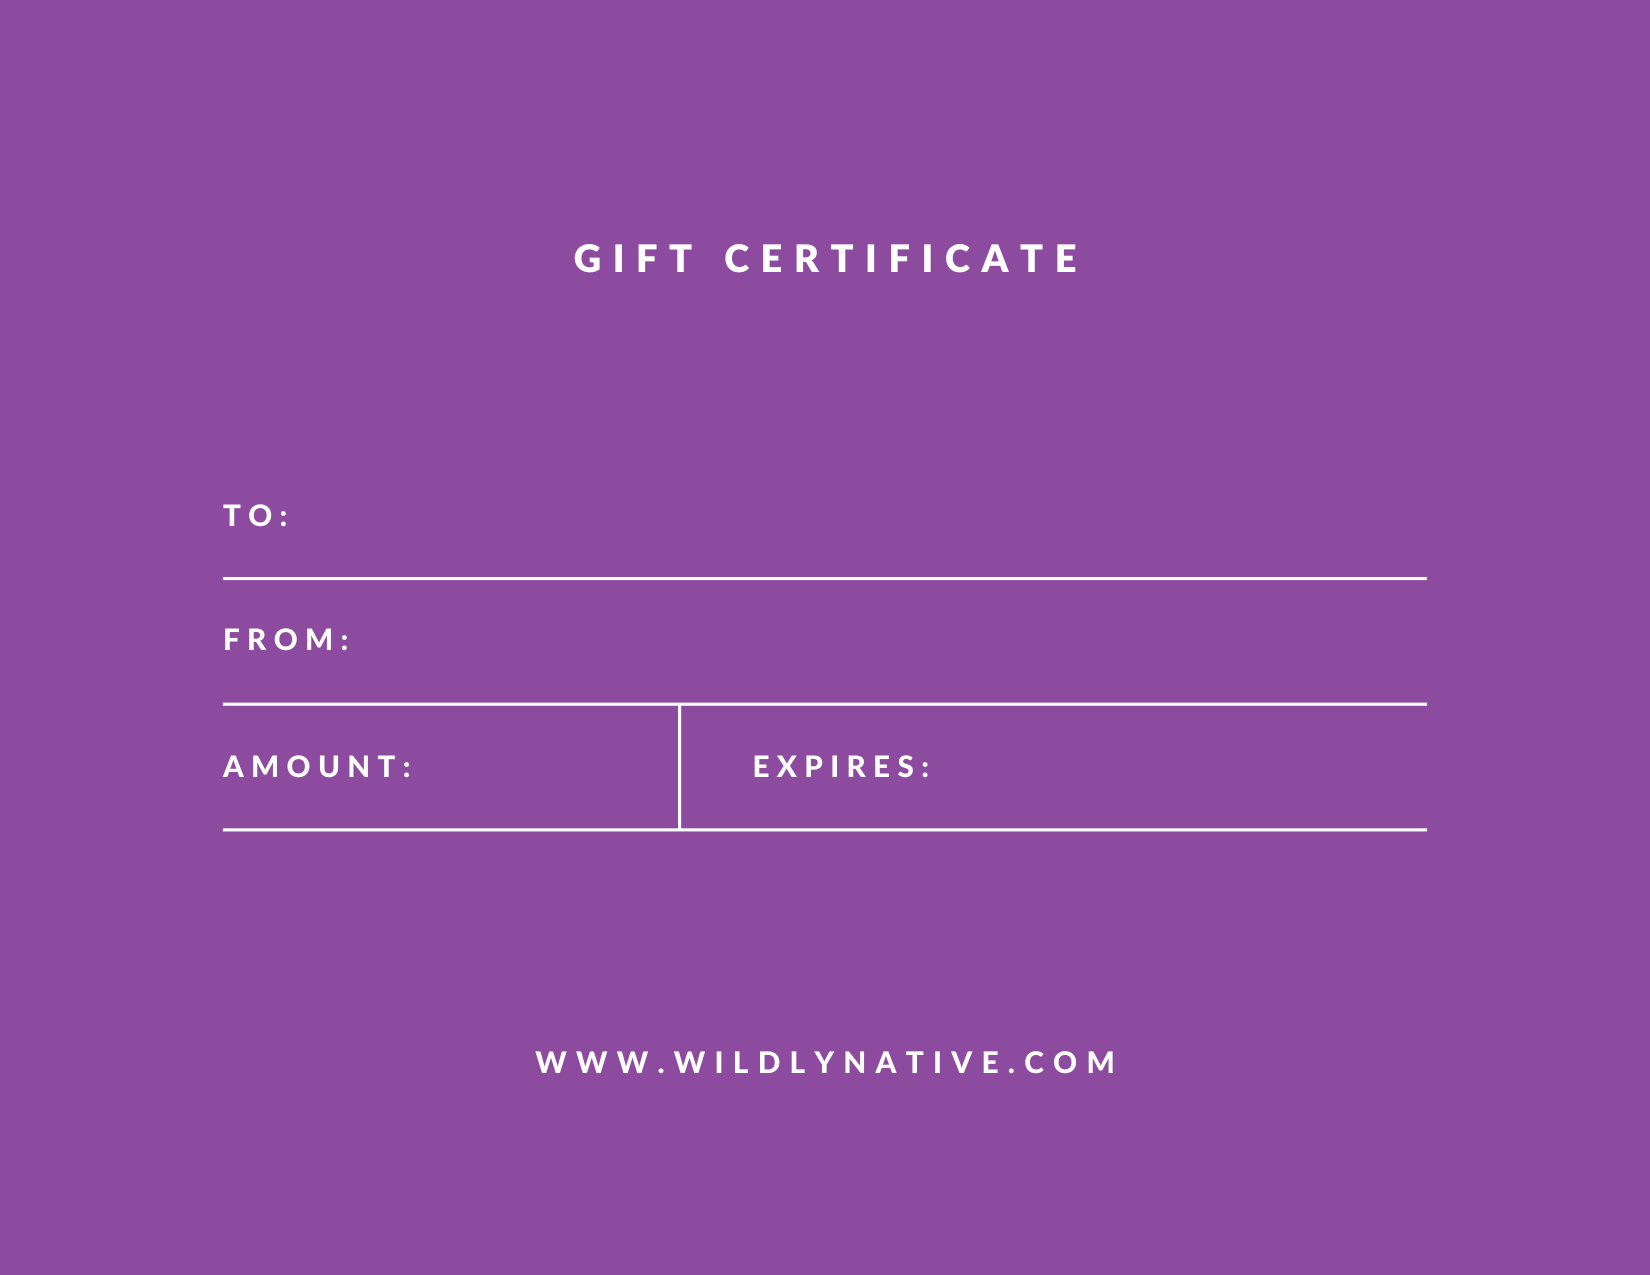 Flat image of a purple gift certificate